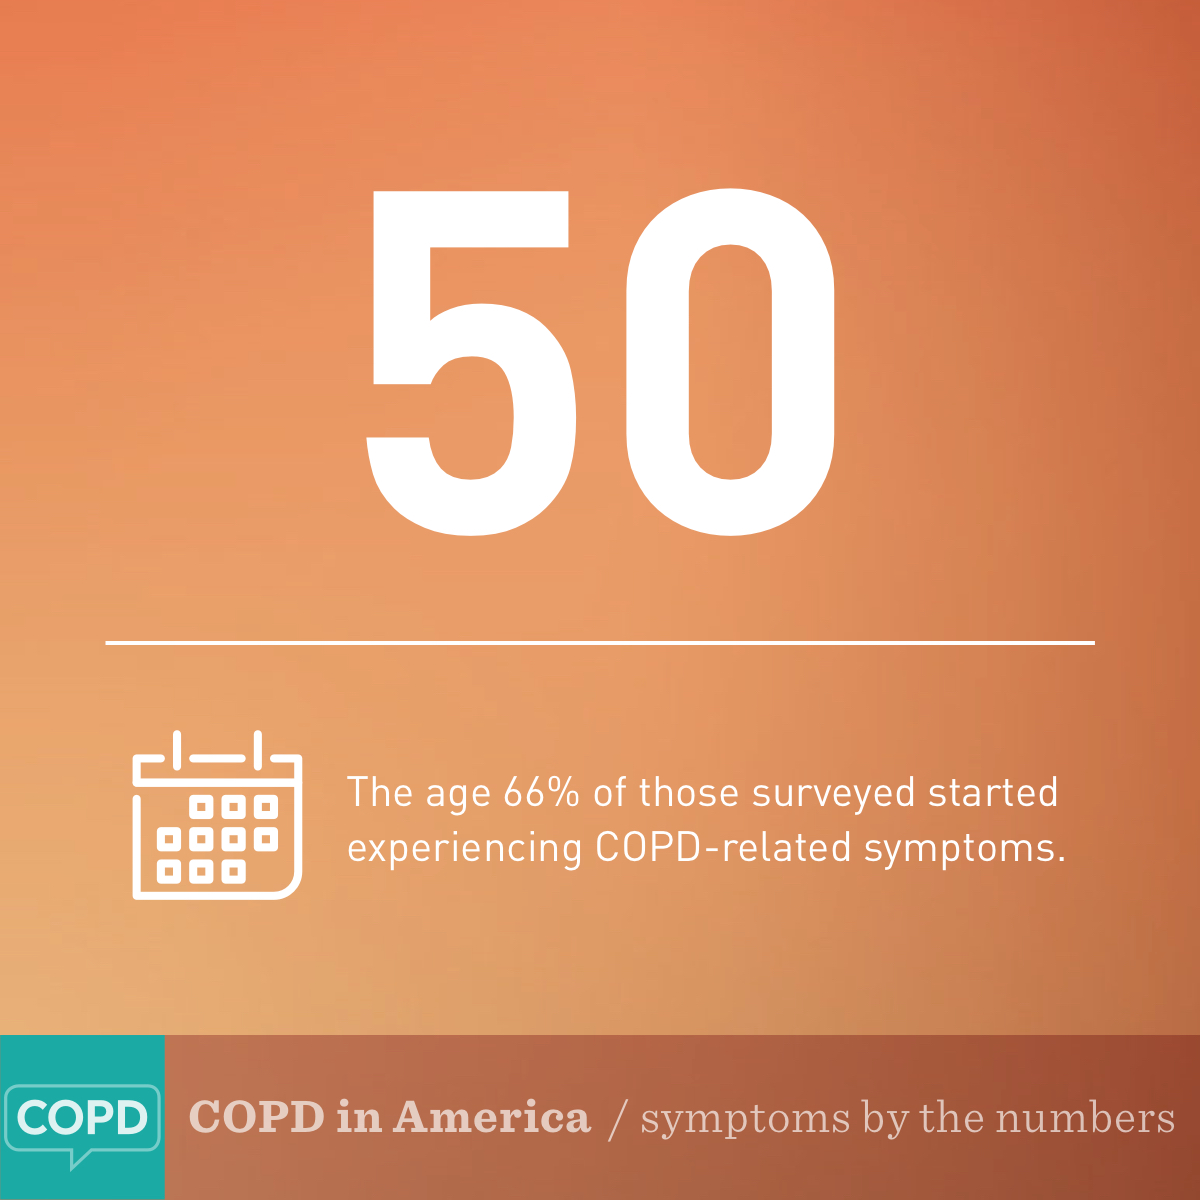 COPD symptoms by the numbers